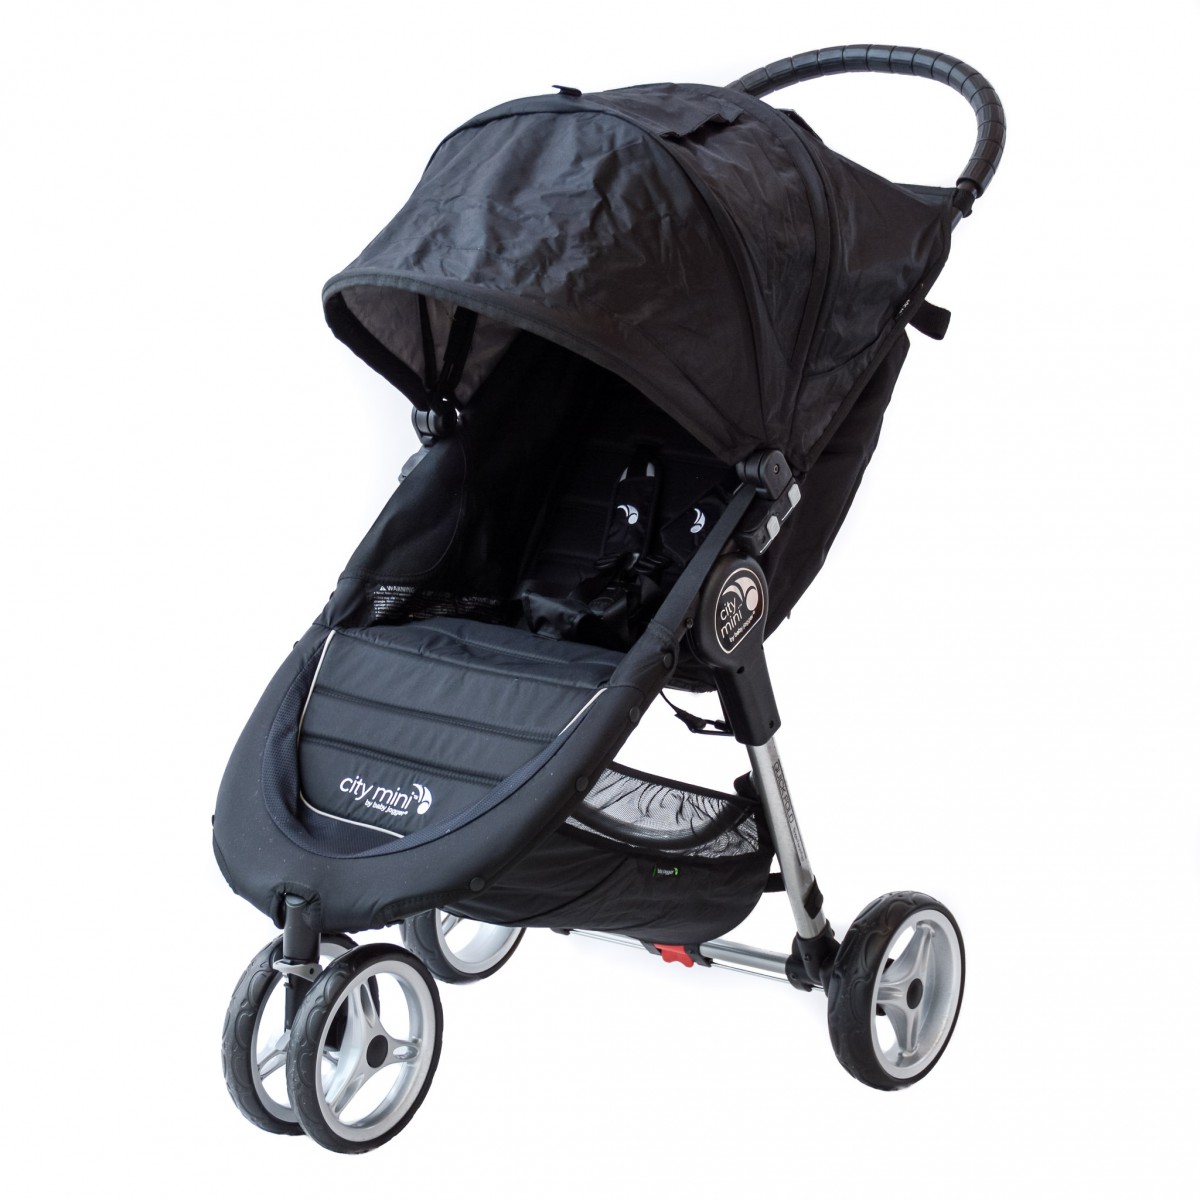 Baby Jogger City Mini Review | Tested & Rated